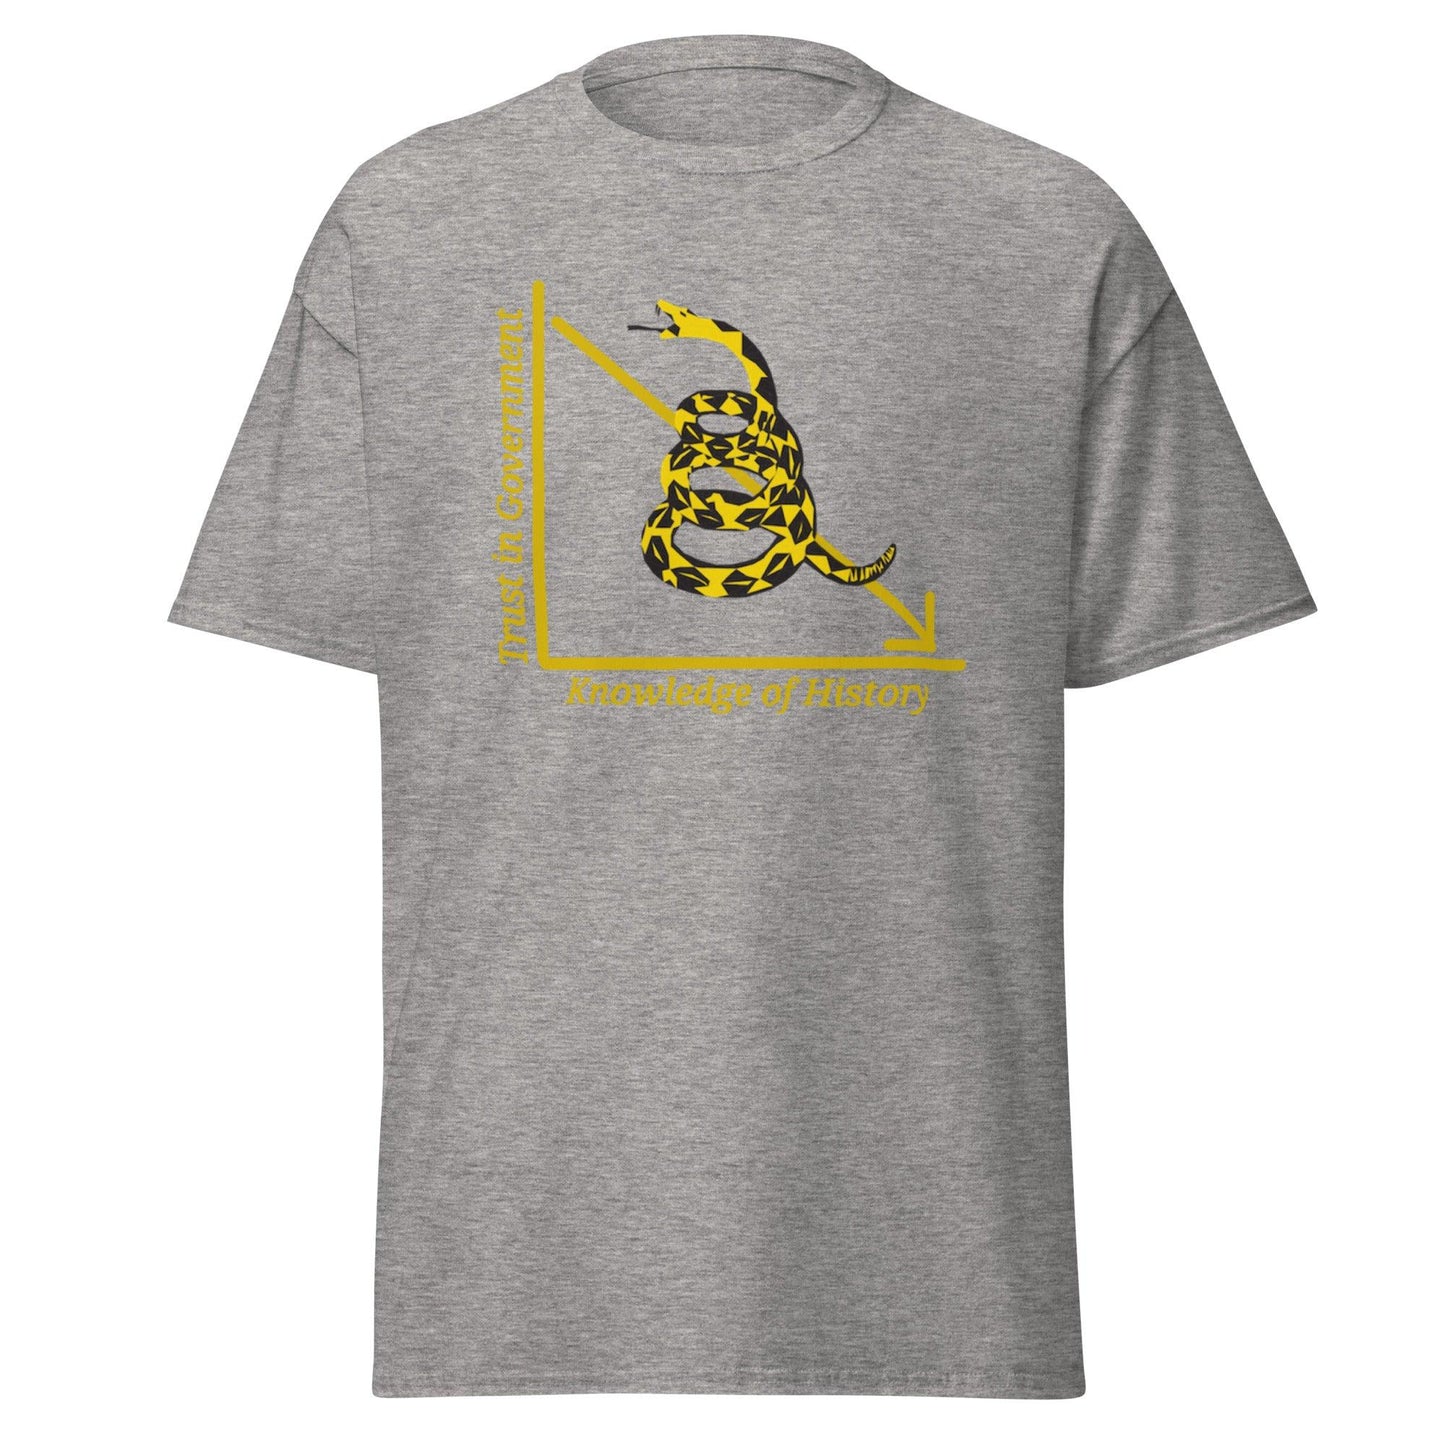 Anarchy Wear "Trust in Government" Golden Snake "Bigger" Classic tee - AnarchyWear